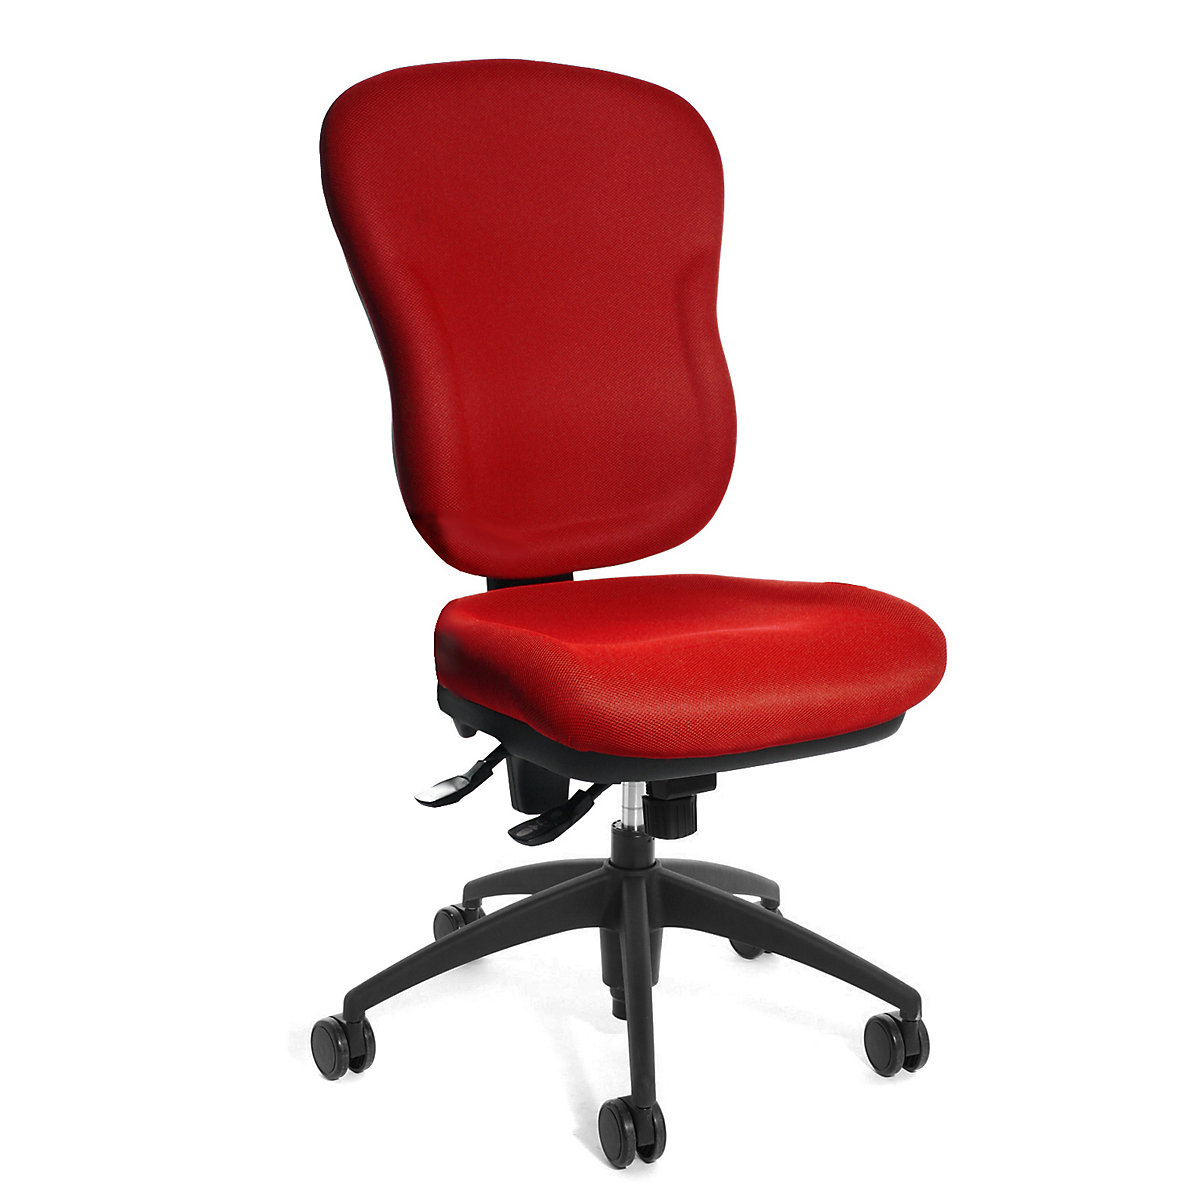 WELLPOINT 30 SY office swivel chair – Topstar, high backed chair with shaped foam padding, red-5